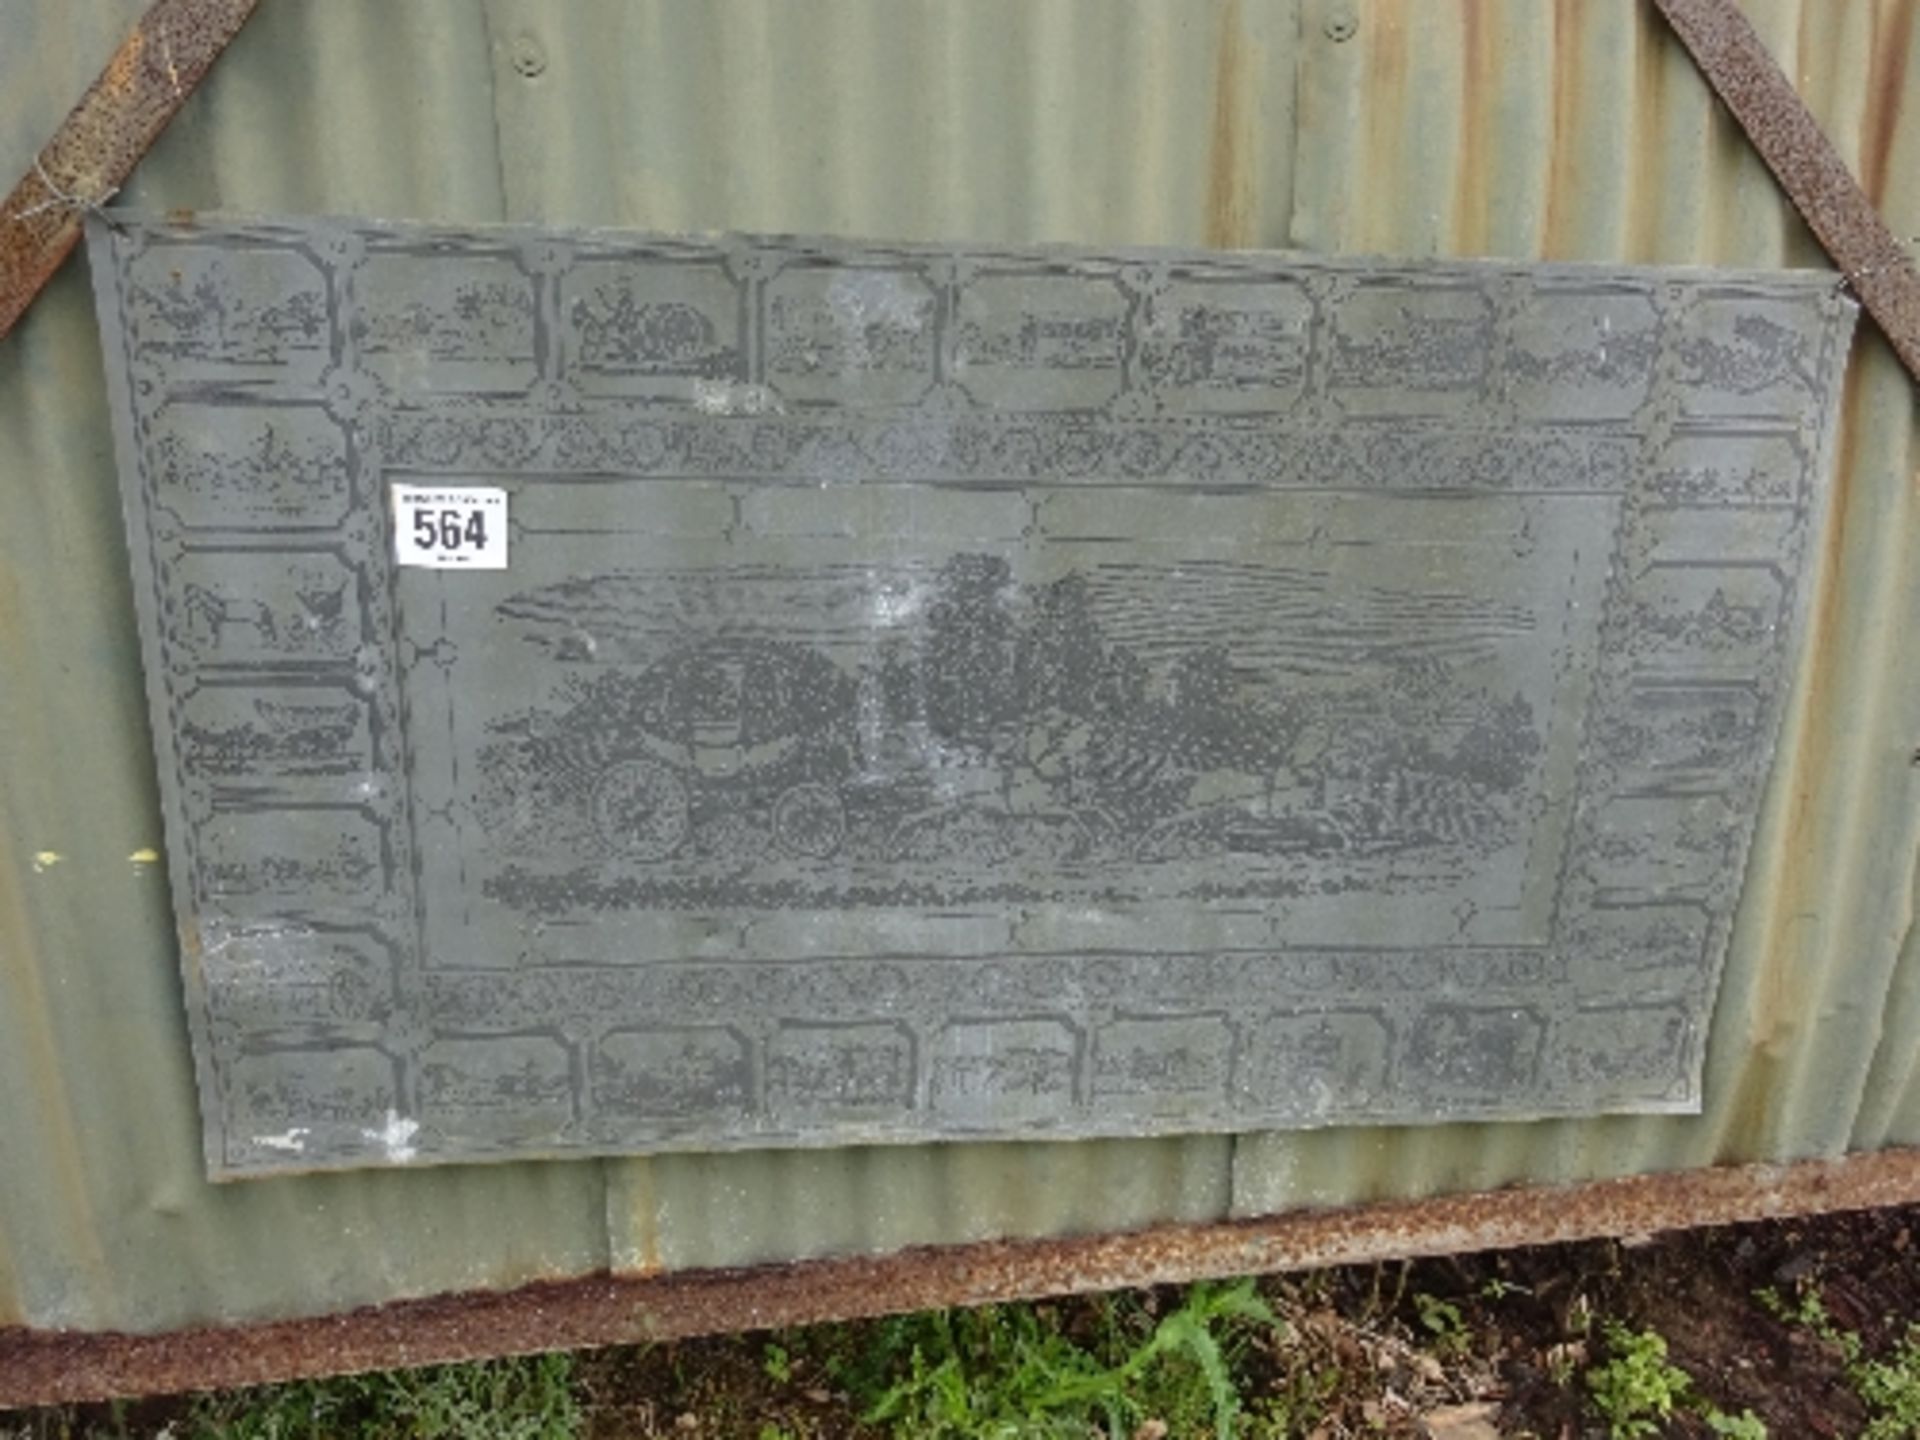 Steel etching of carriages